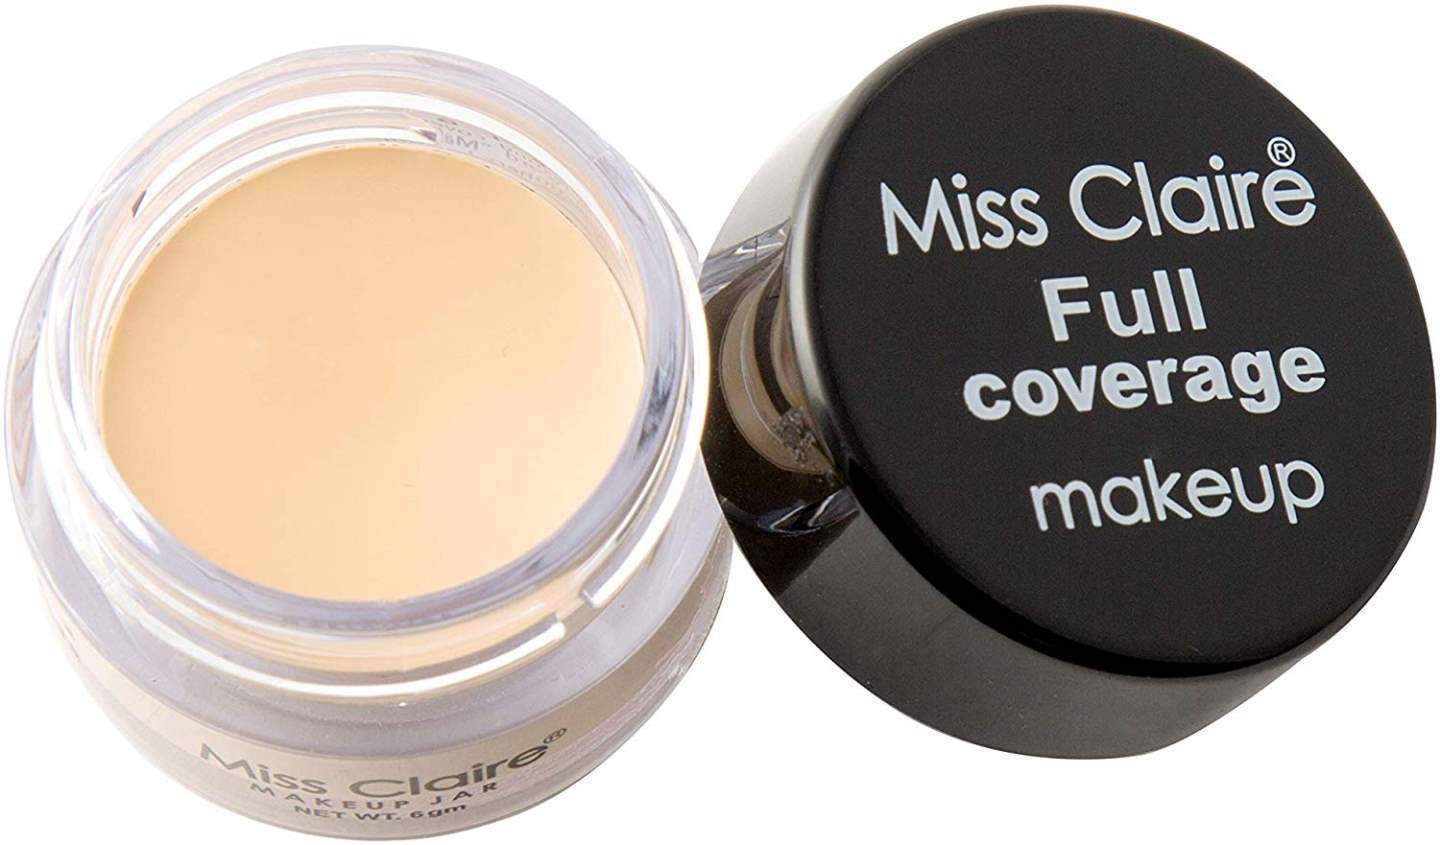 Miss Claire Full Coverage Makeup + Concealer #2, Beige - 6 g